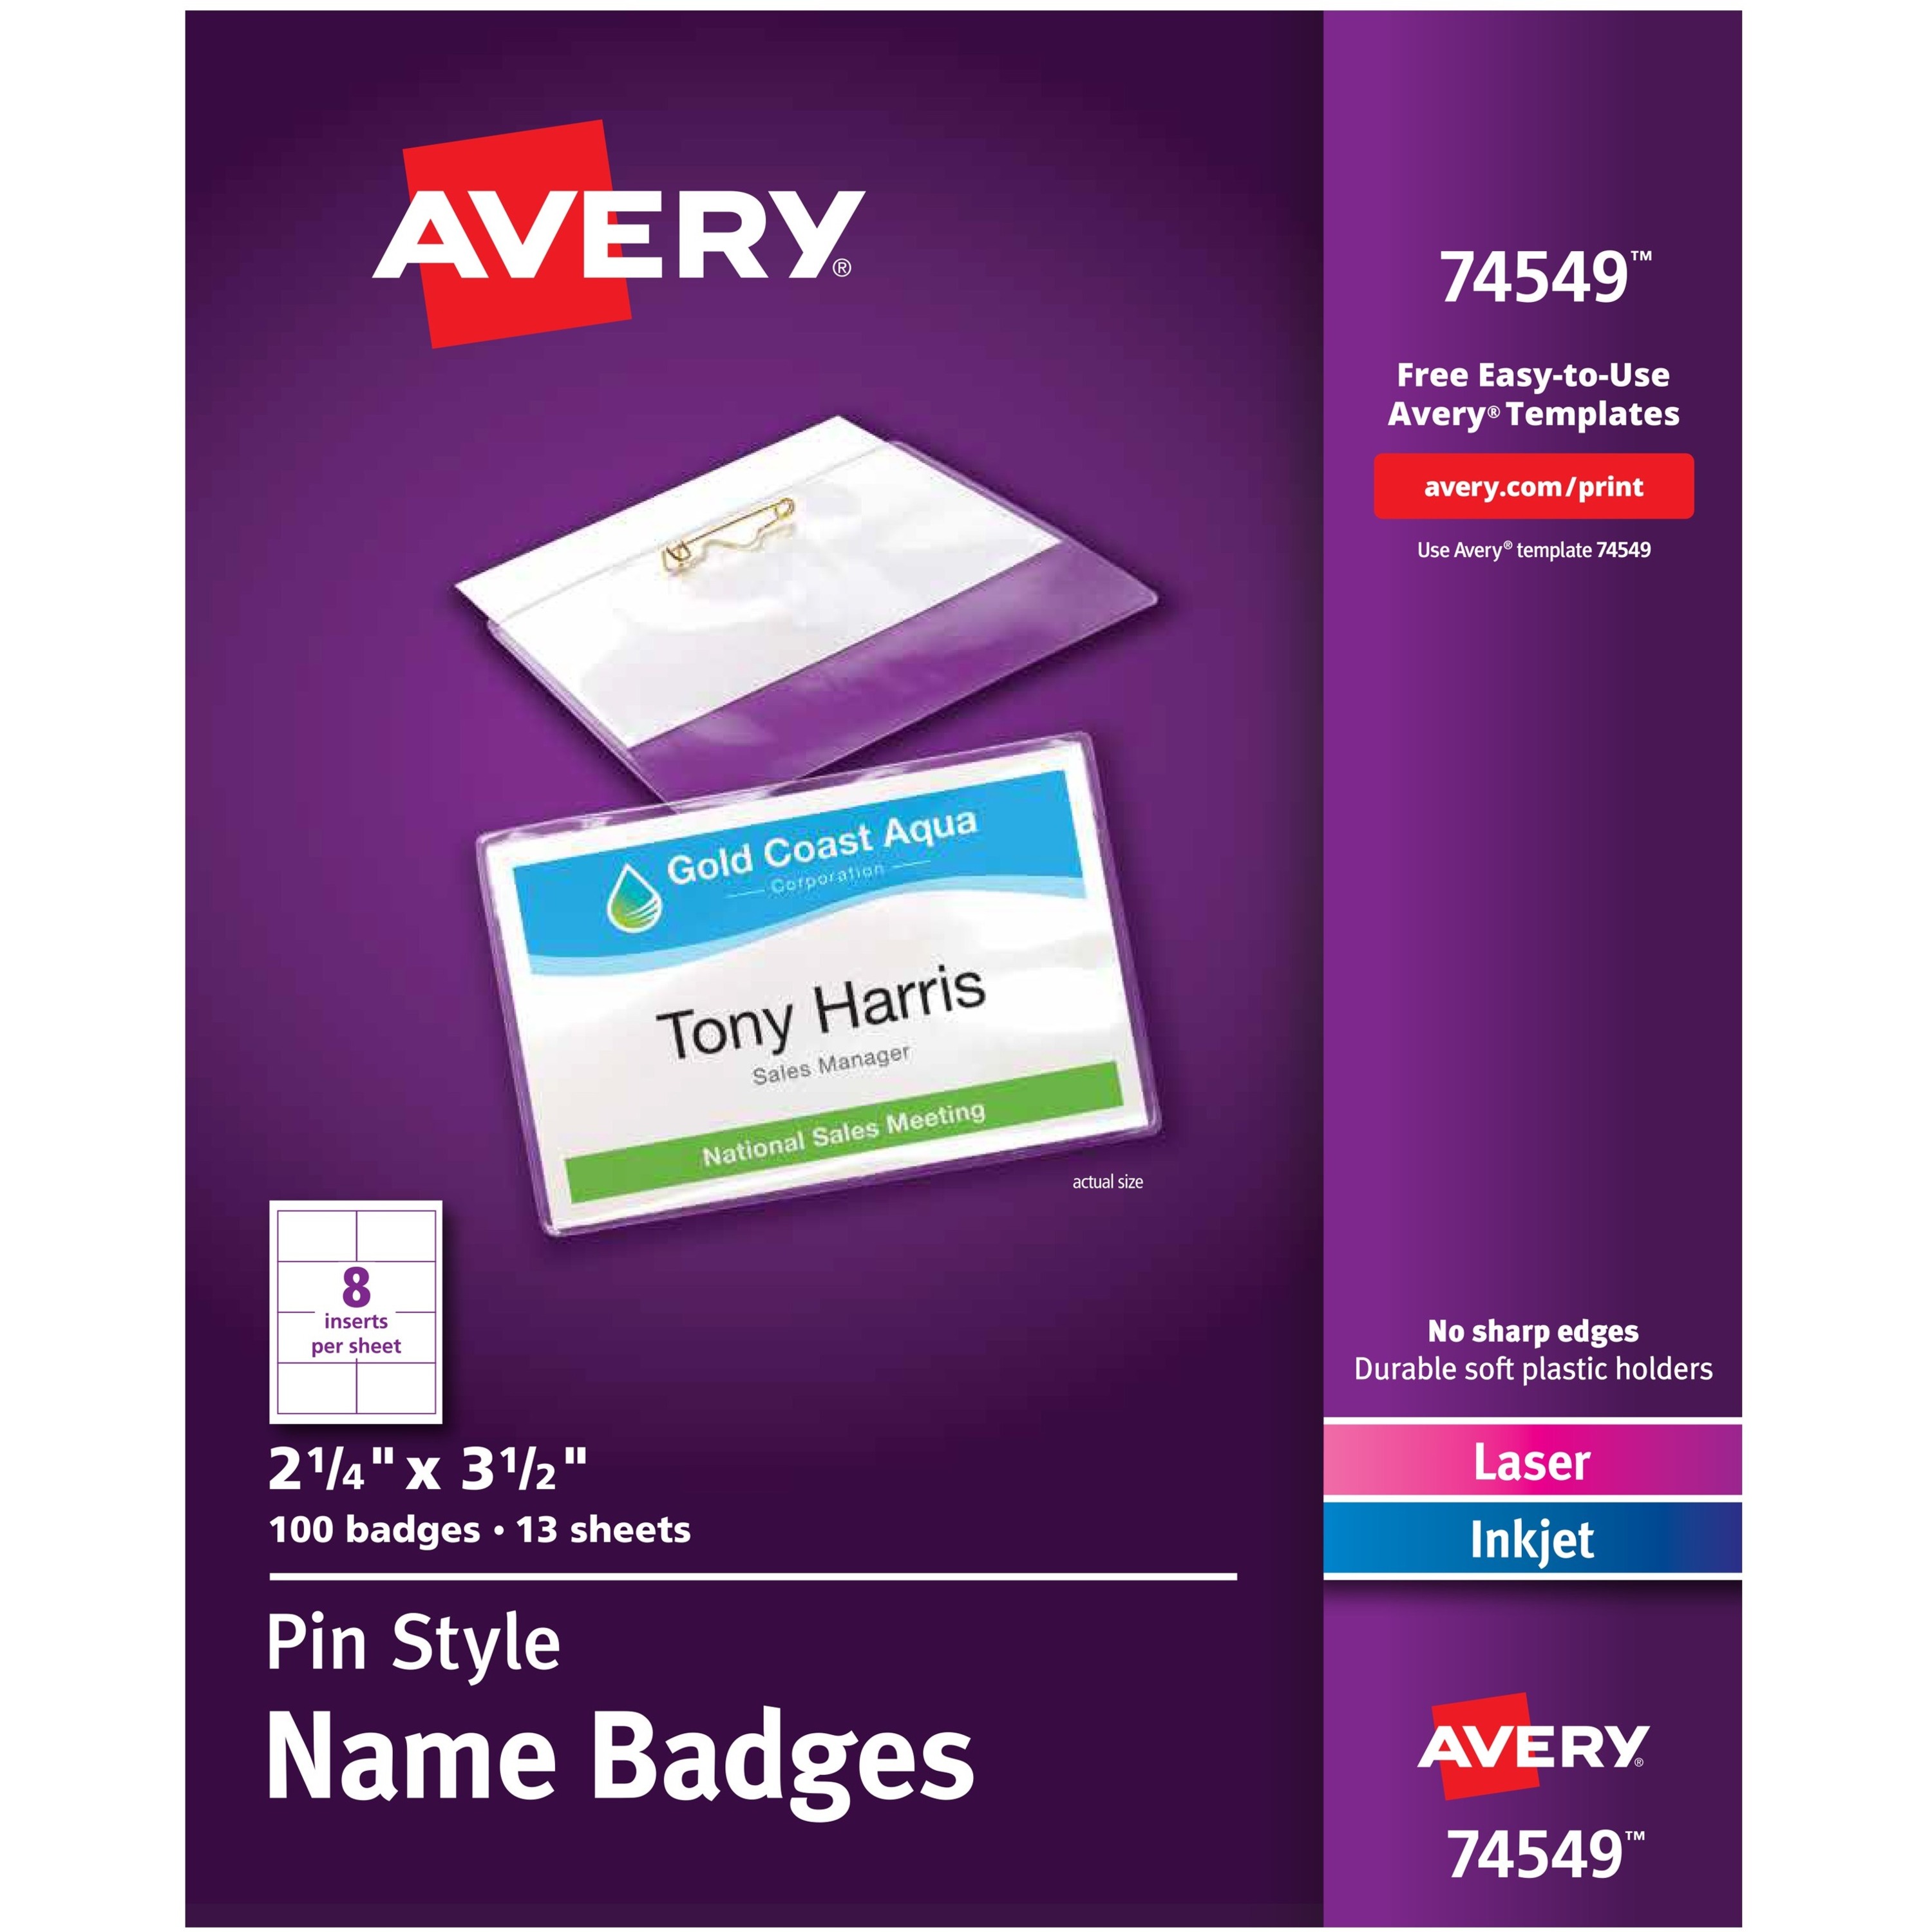 Avery Pin Style Name Badge Kits Business Card Size 2 14 X 3 12 Box Of 100 Office Depot Avery 4x3 name tag template